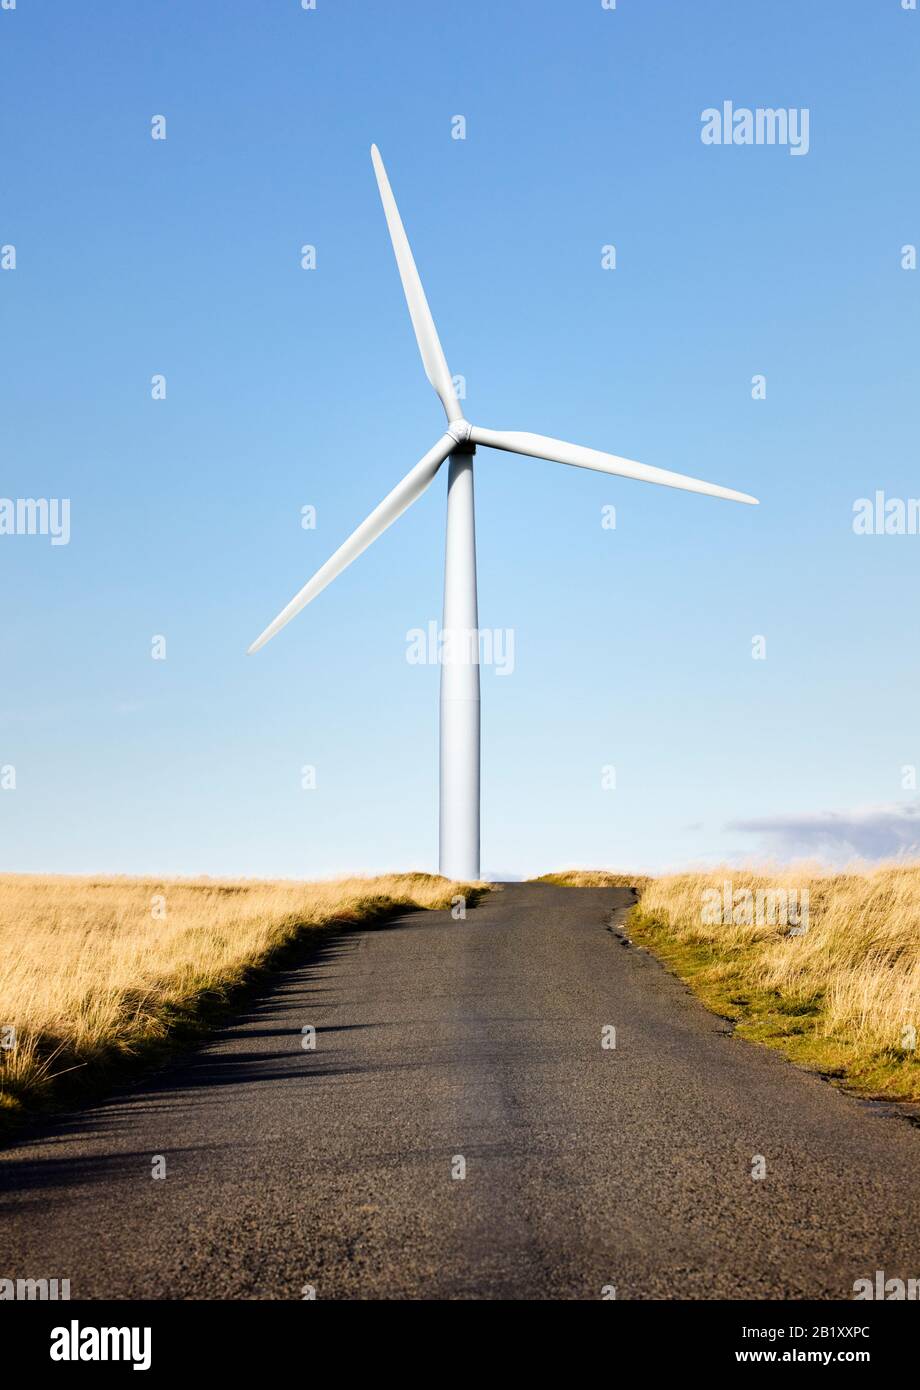 One wind turbine at the end of a countryside road Stock Photo